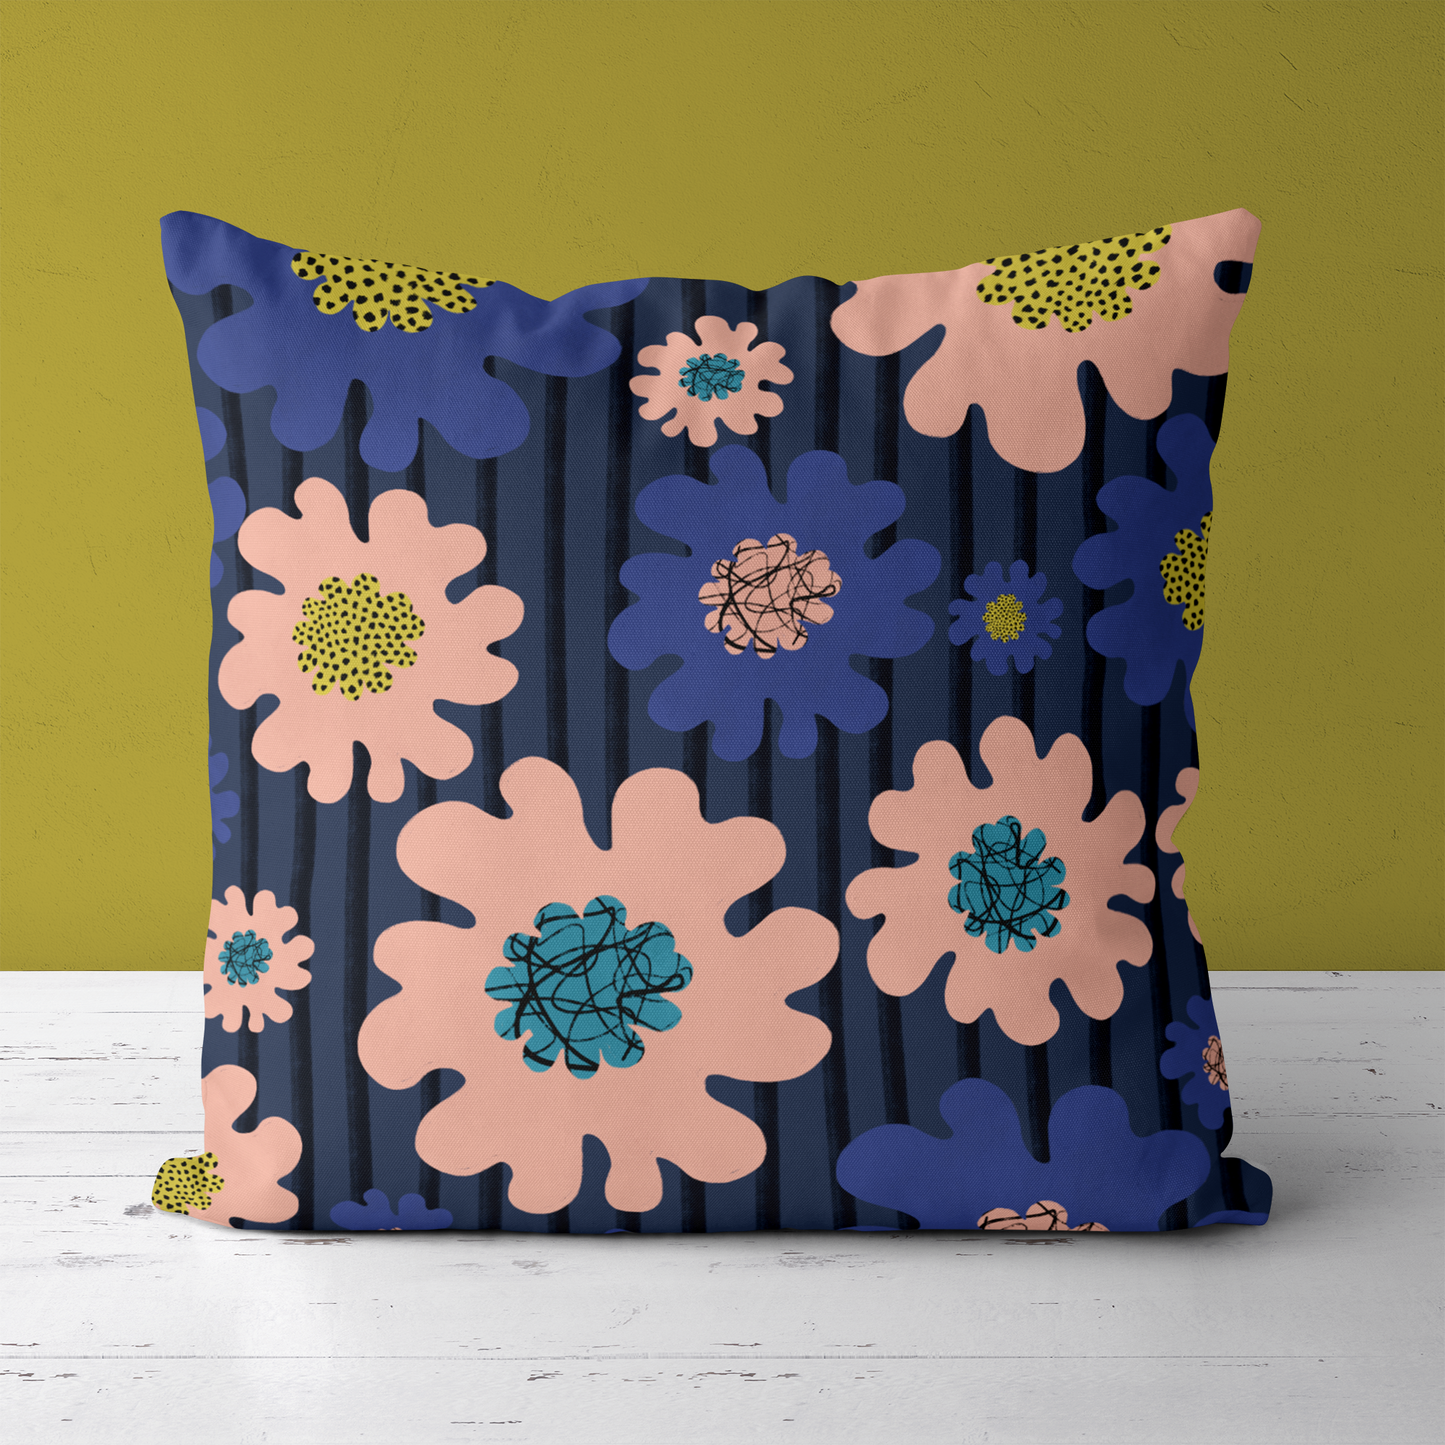 Retro Flower with Striped Pattern Throw Pillow